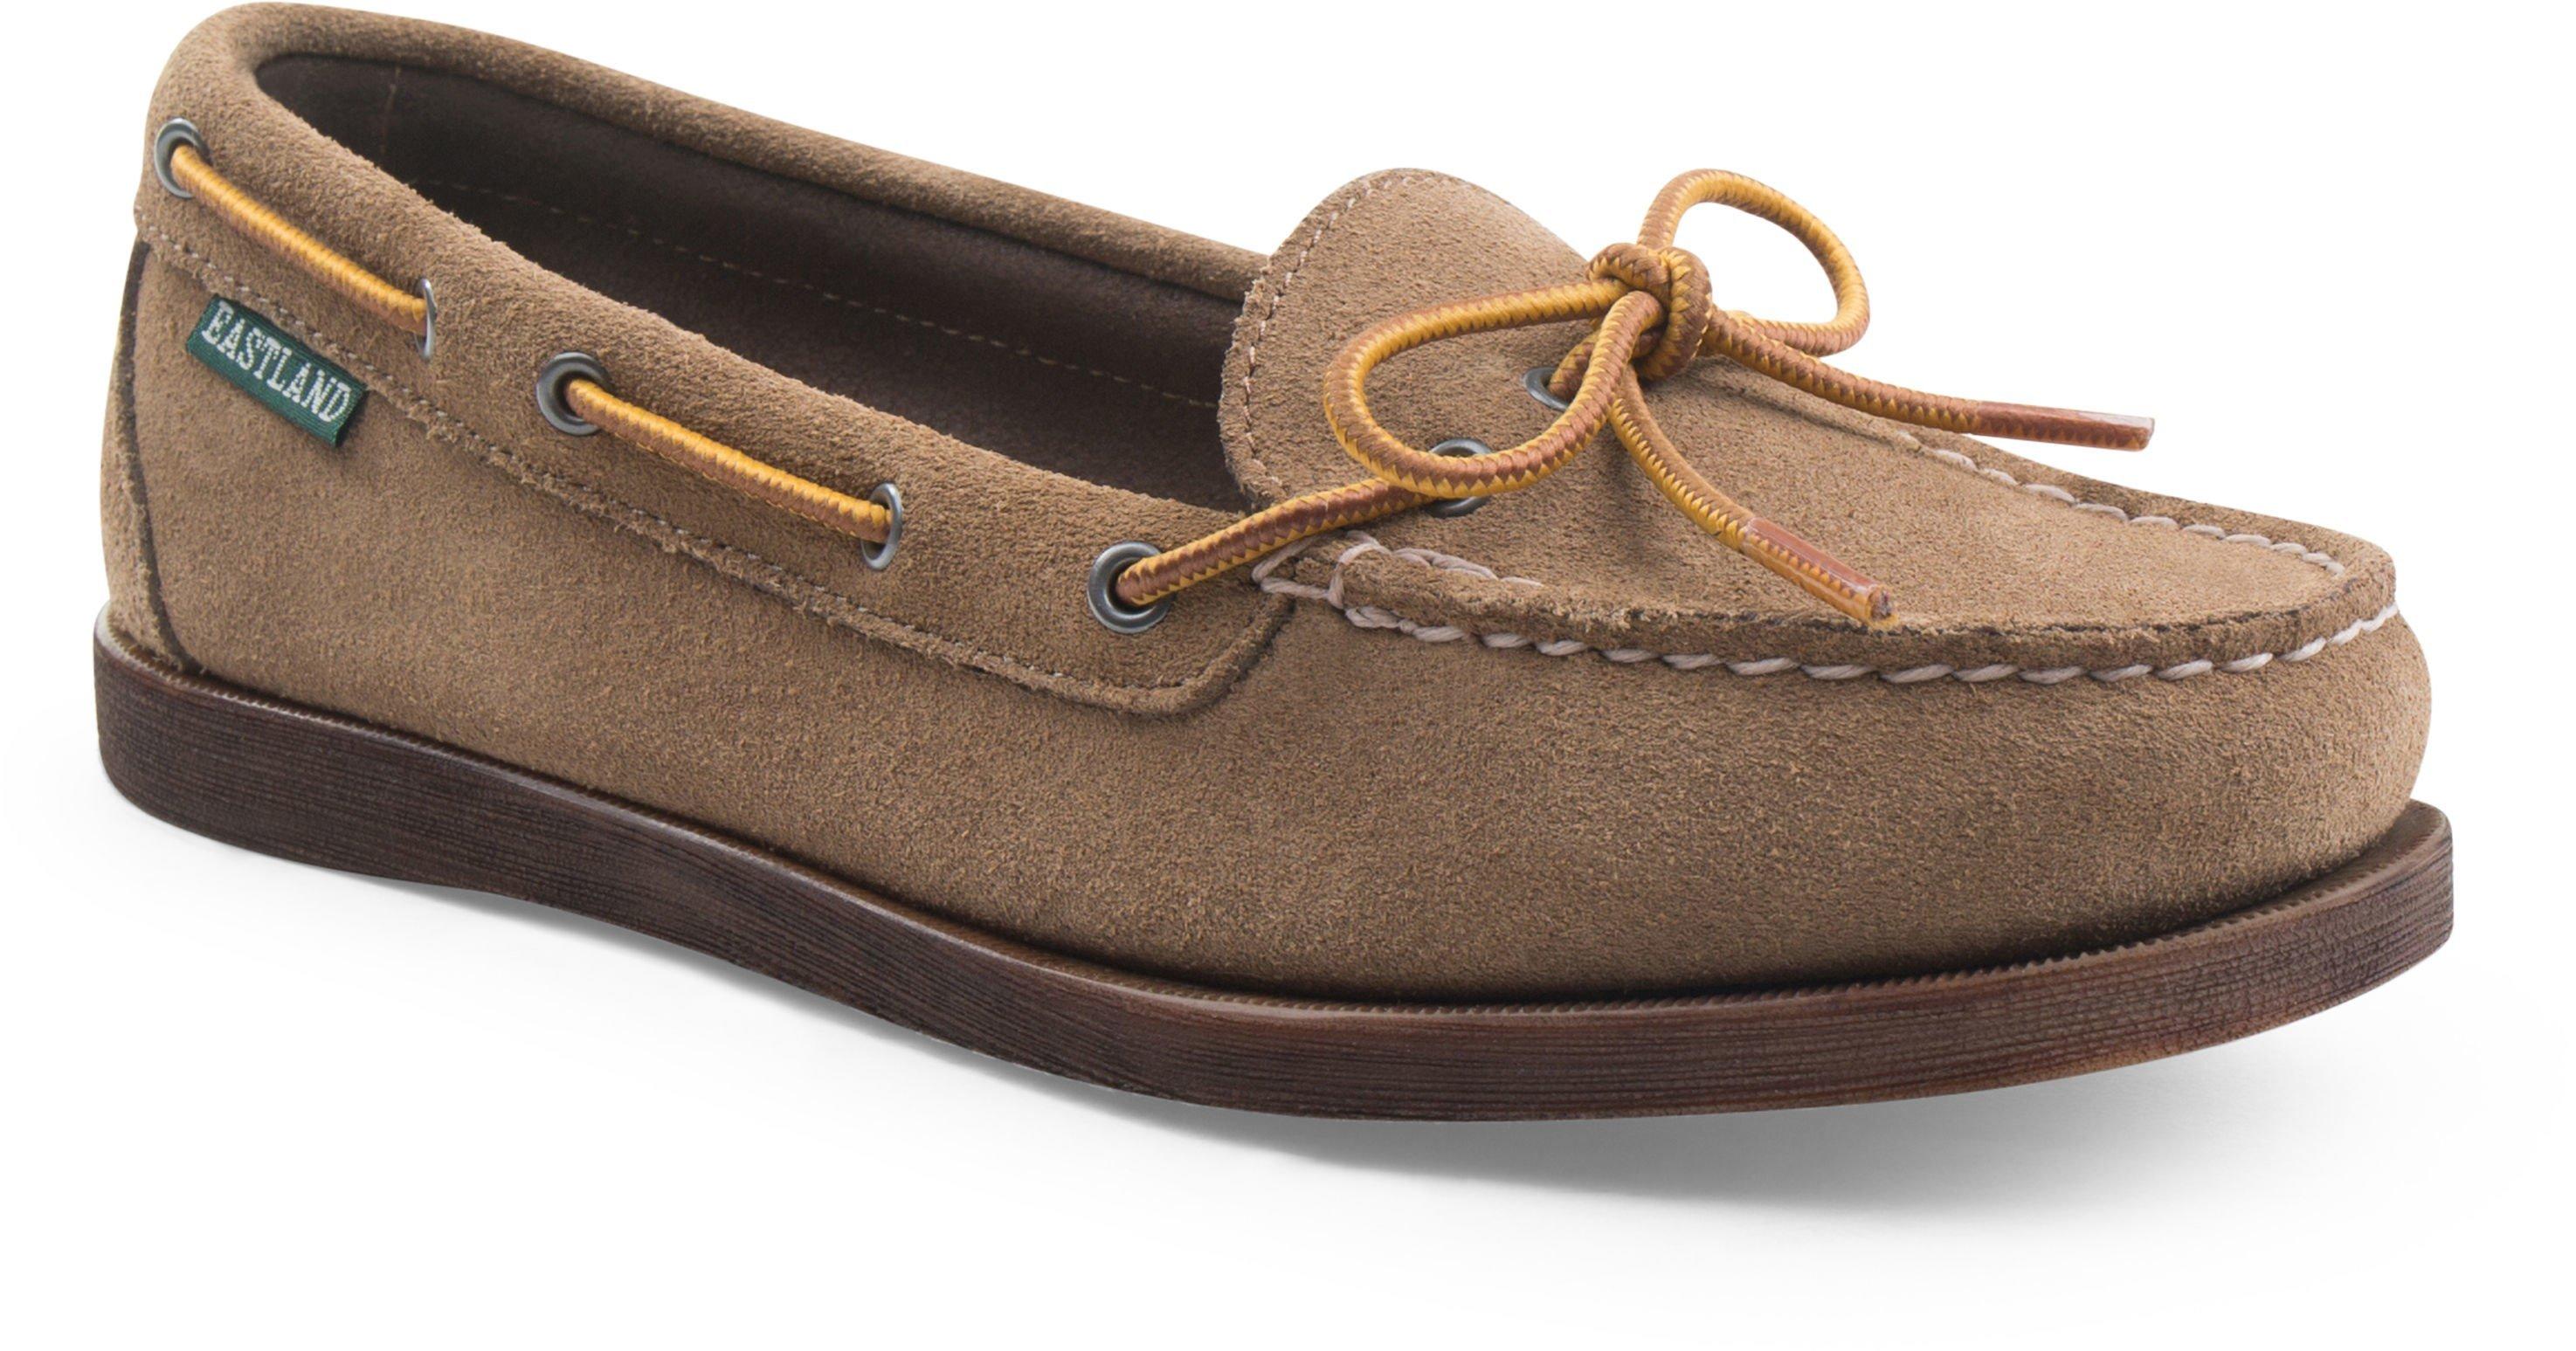 Women's Boat Shoes | Boat Shoes for Women | Bealls Florida